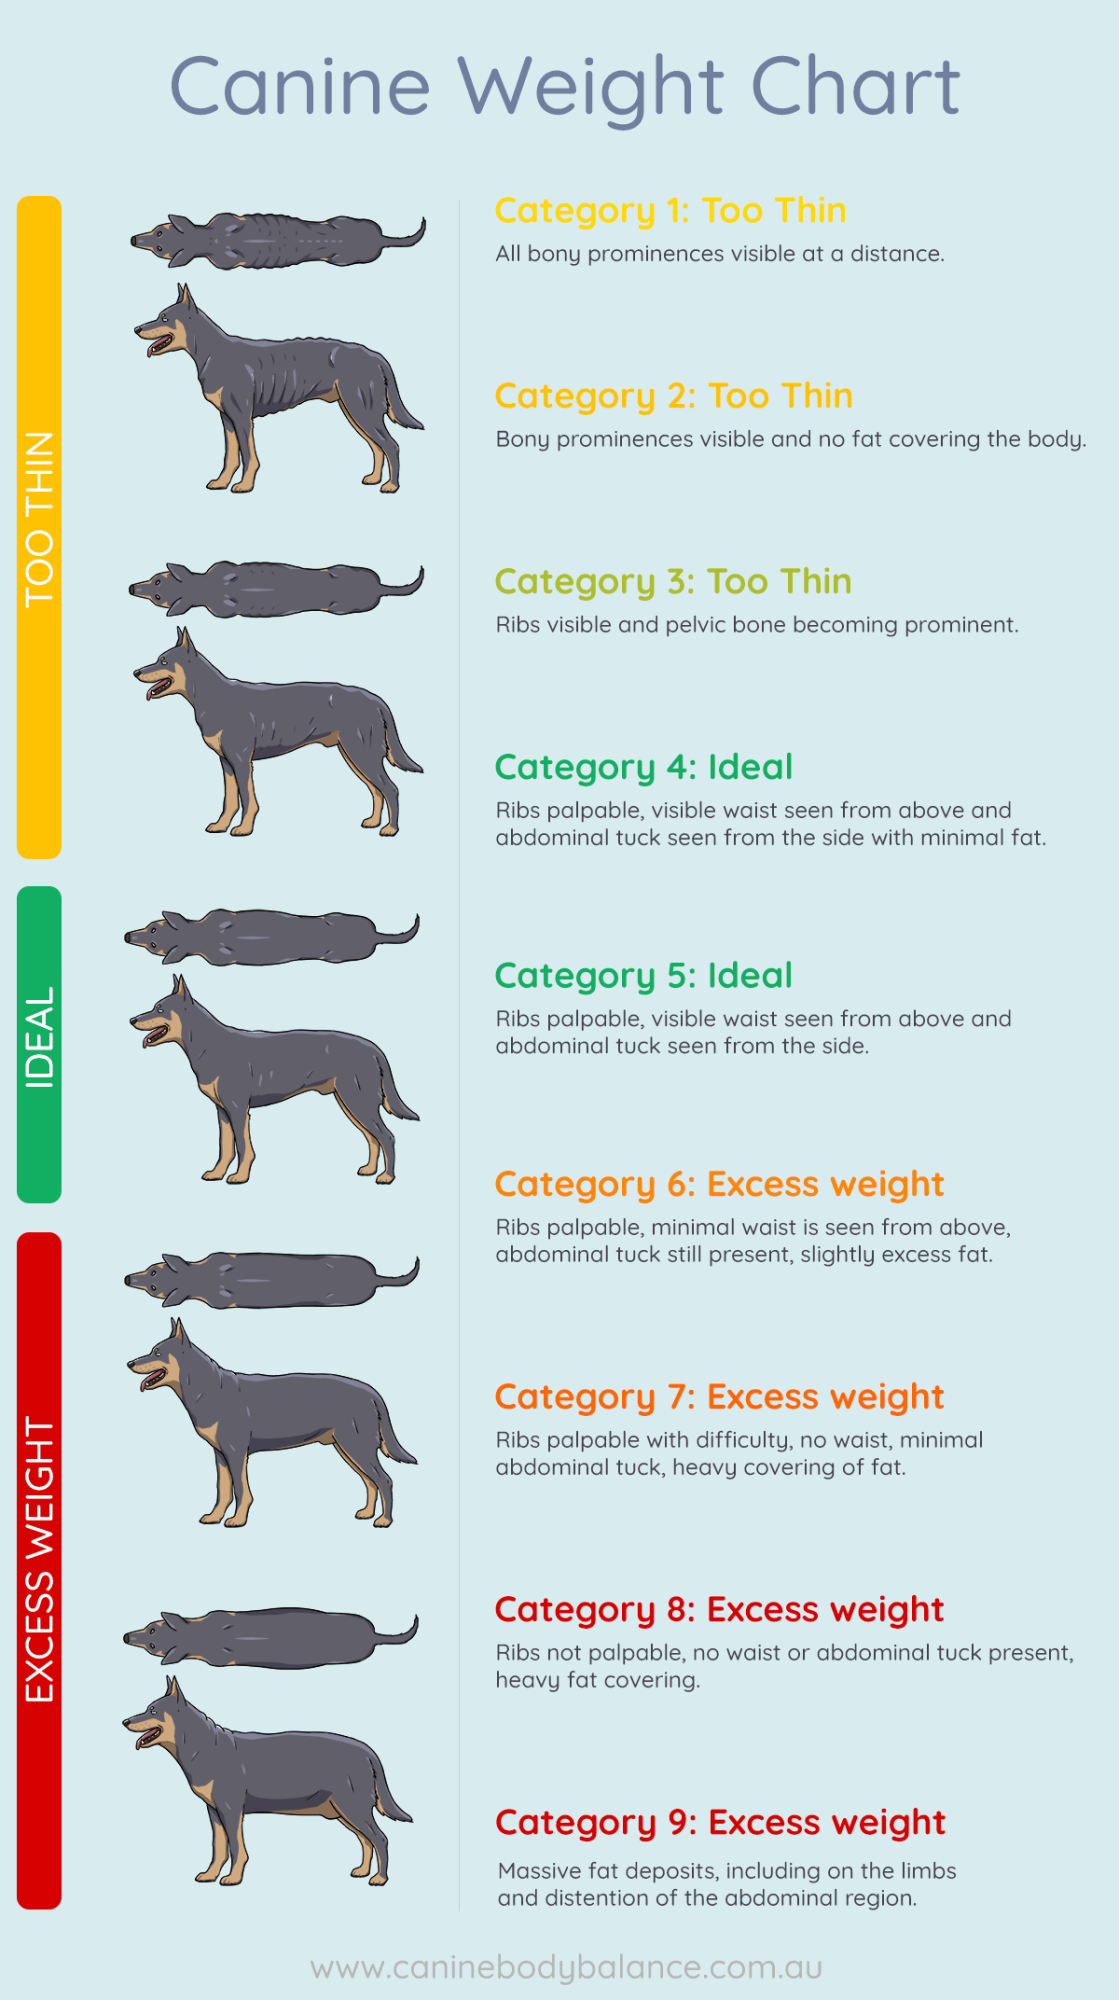 Canine Weight Chart